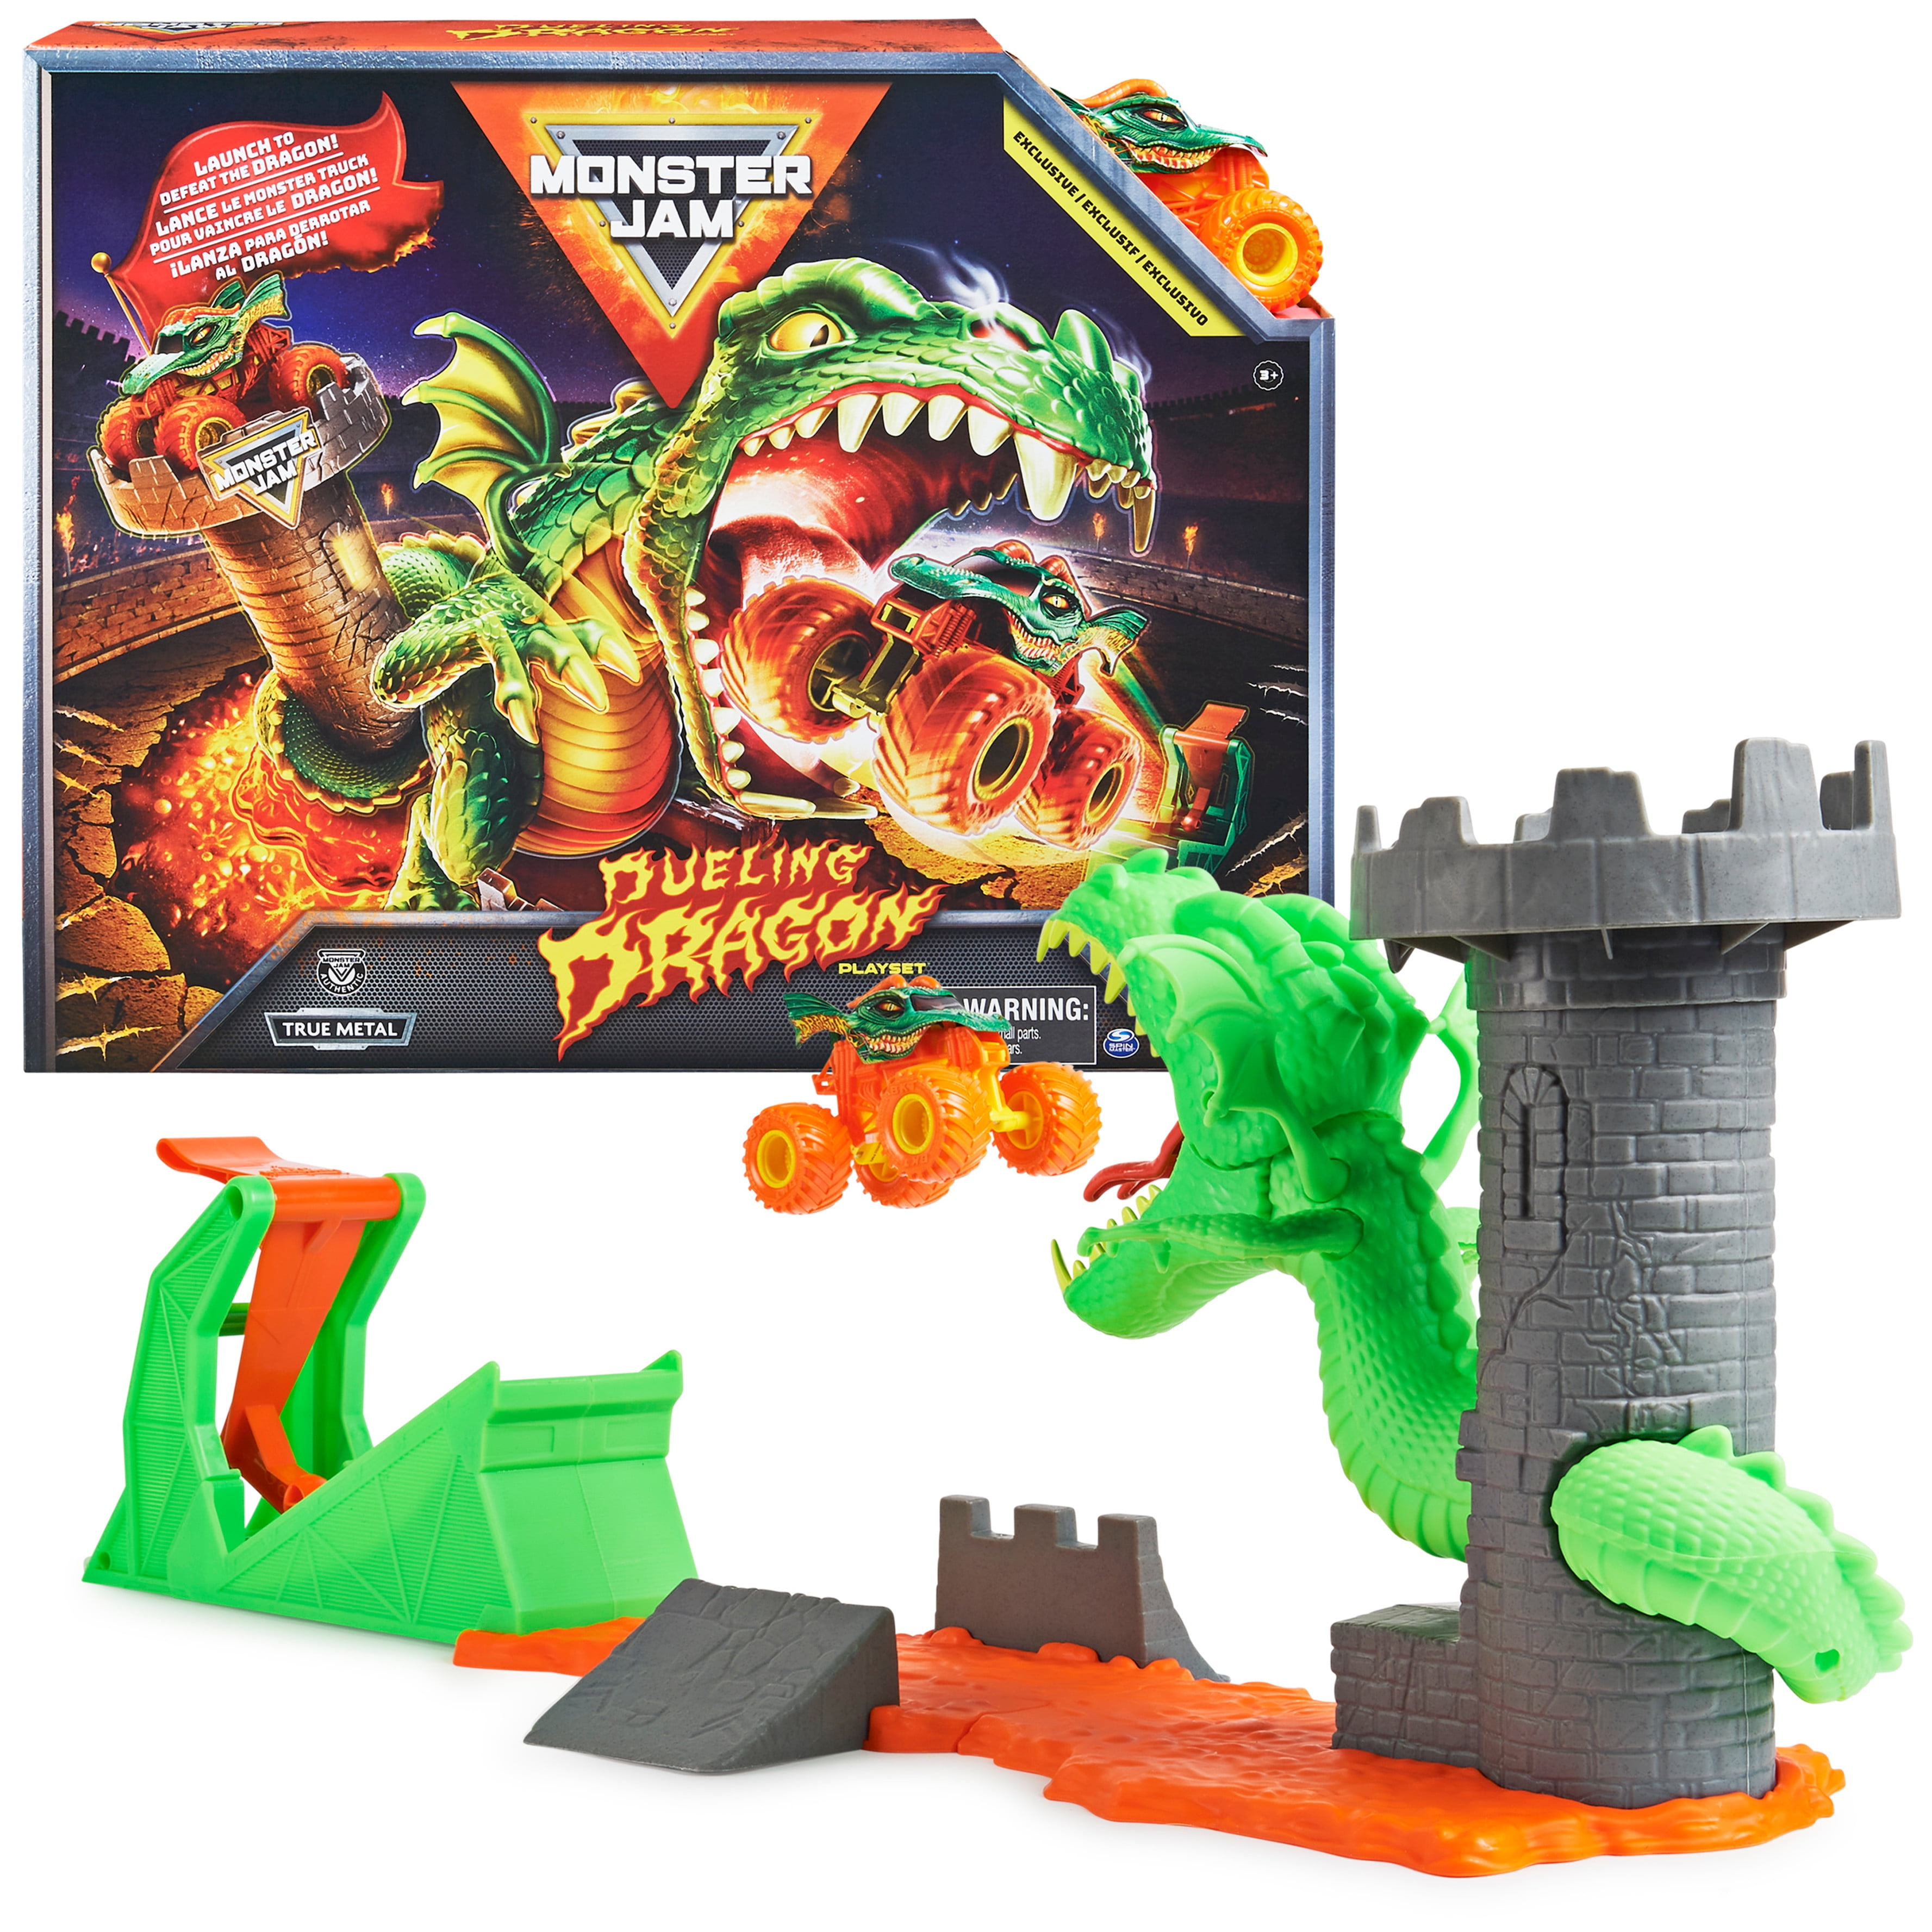 Monster Jam, Dueling Dragon Playset with Exclusive Monster Truck